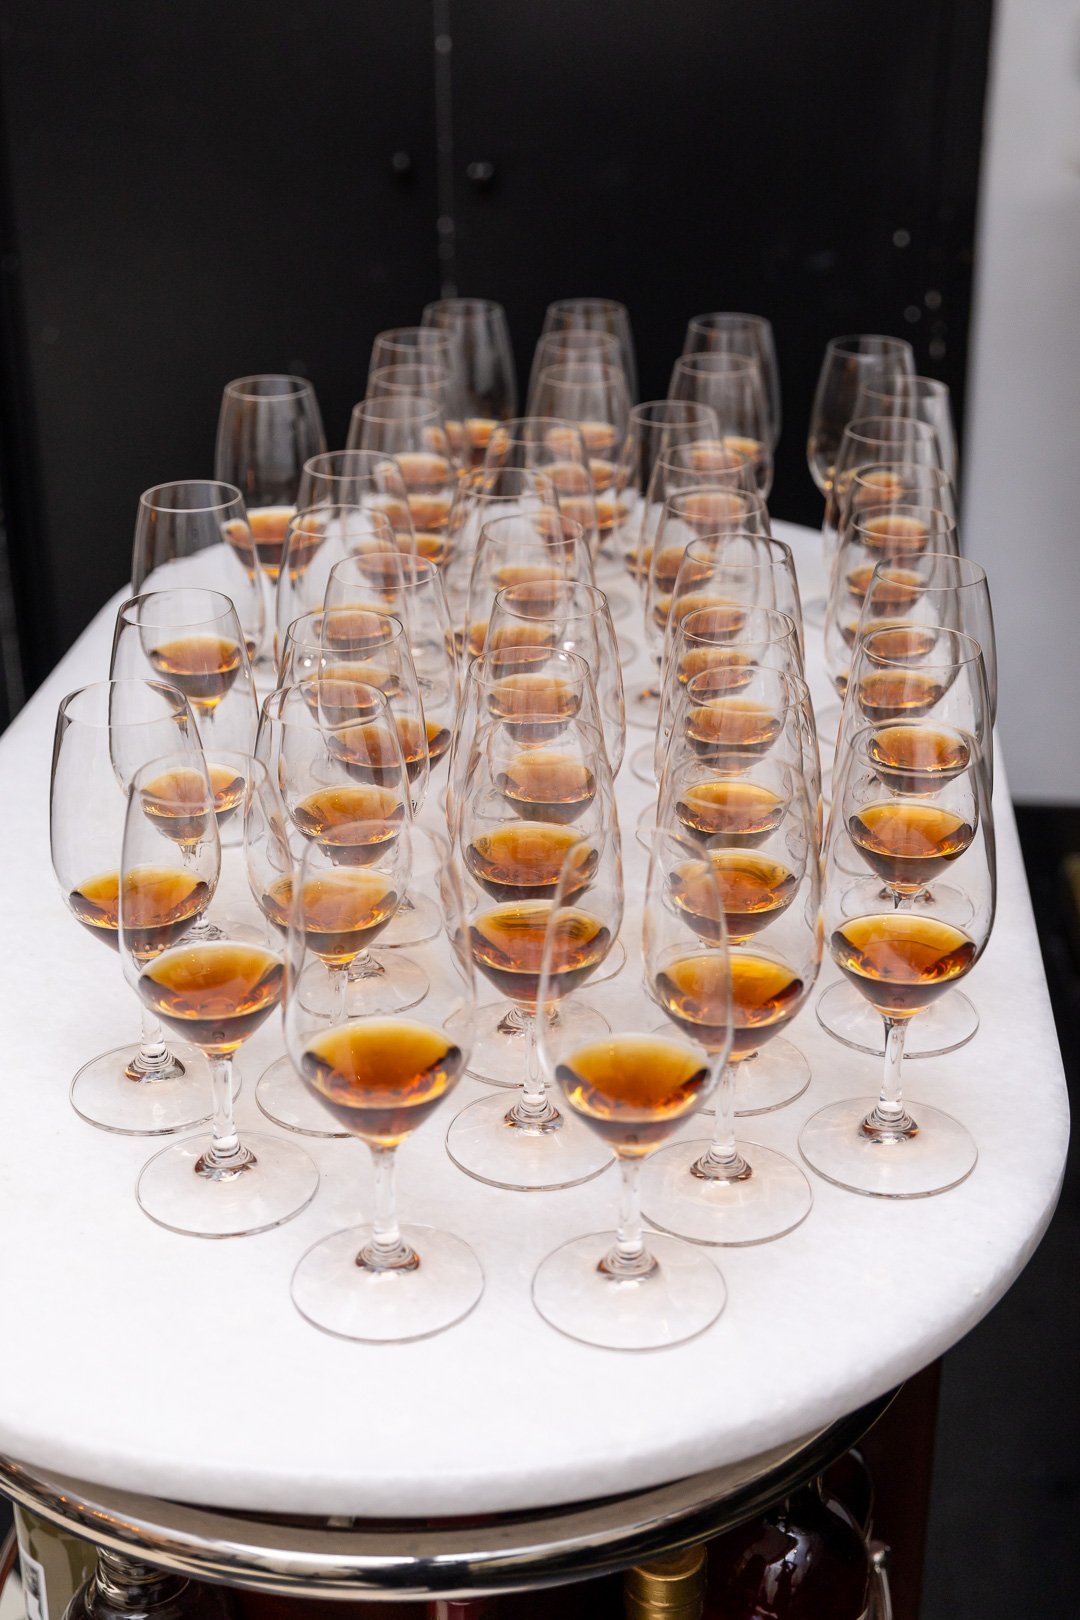 Torres 15 Brandy, curated by Catalan sommelier Lucas Payà